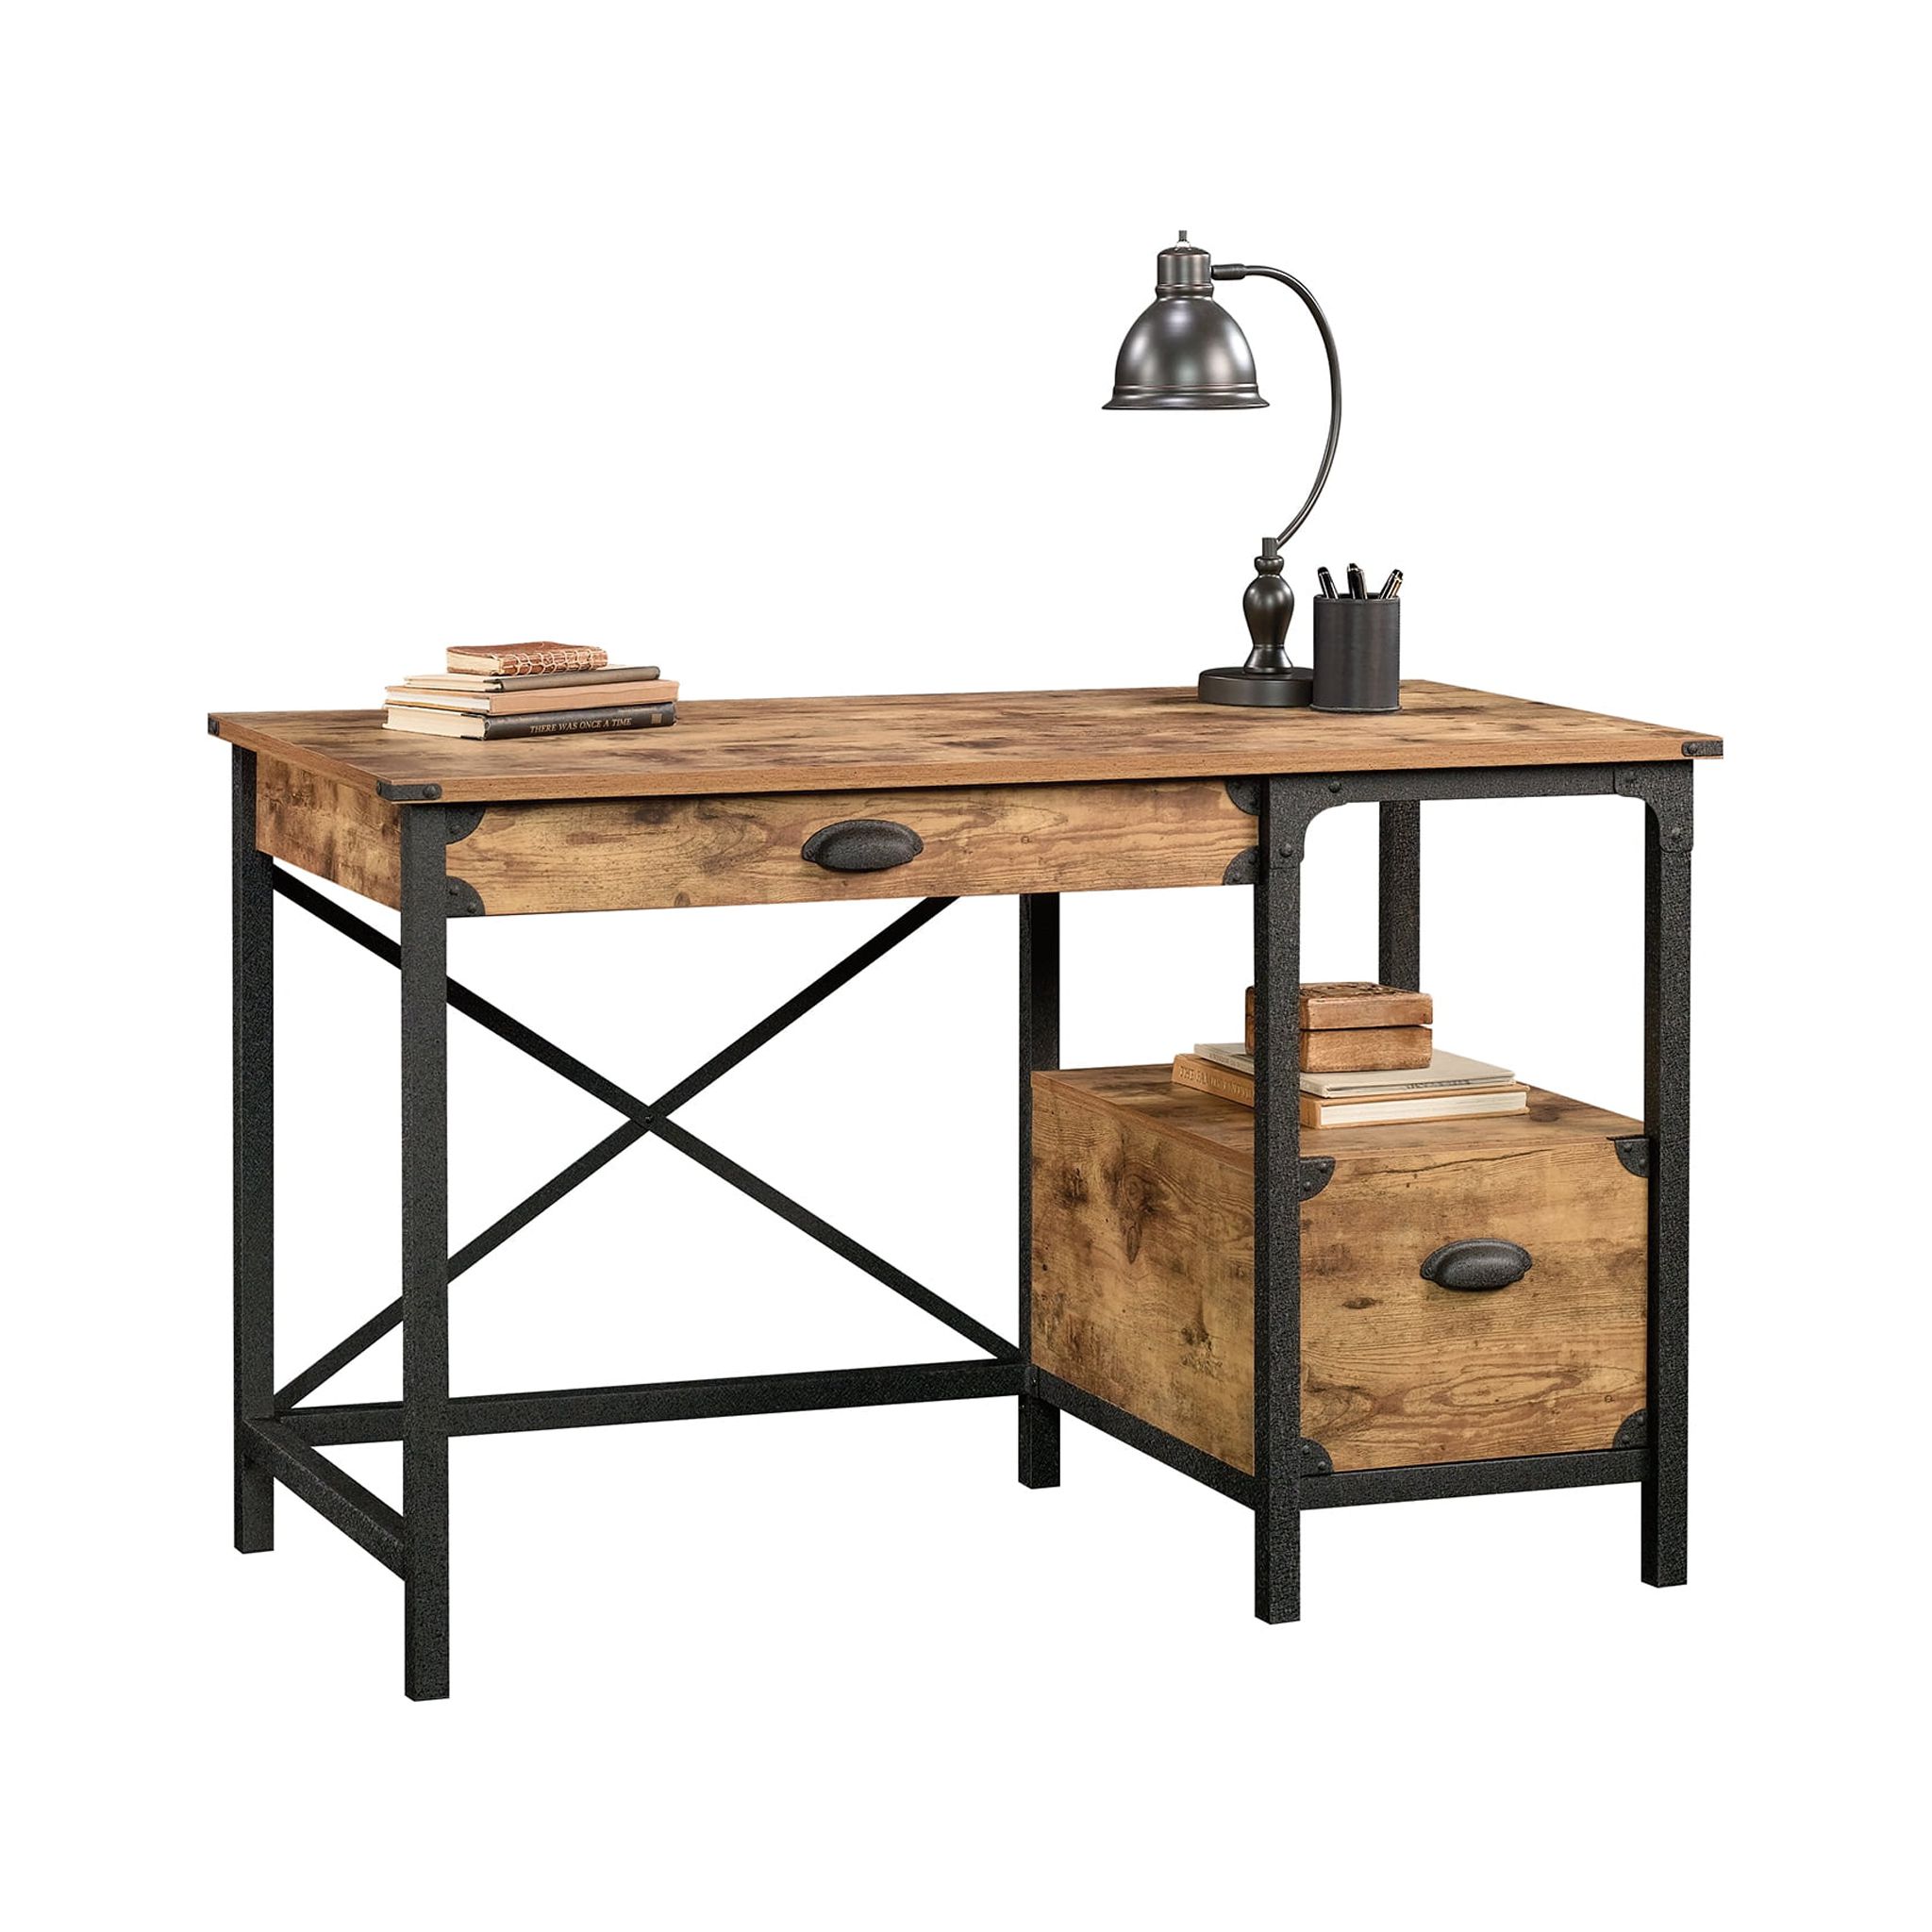 Better Homes & Gardens Rustic Country, Weathered Pine Finish - image 1 of 11